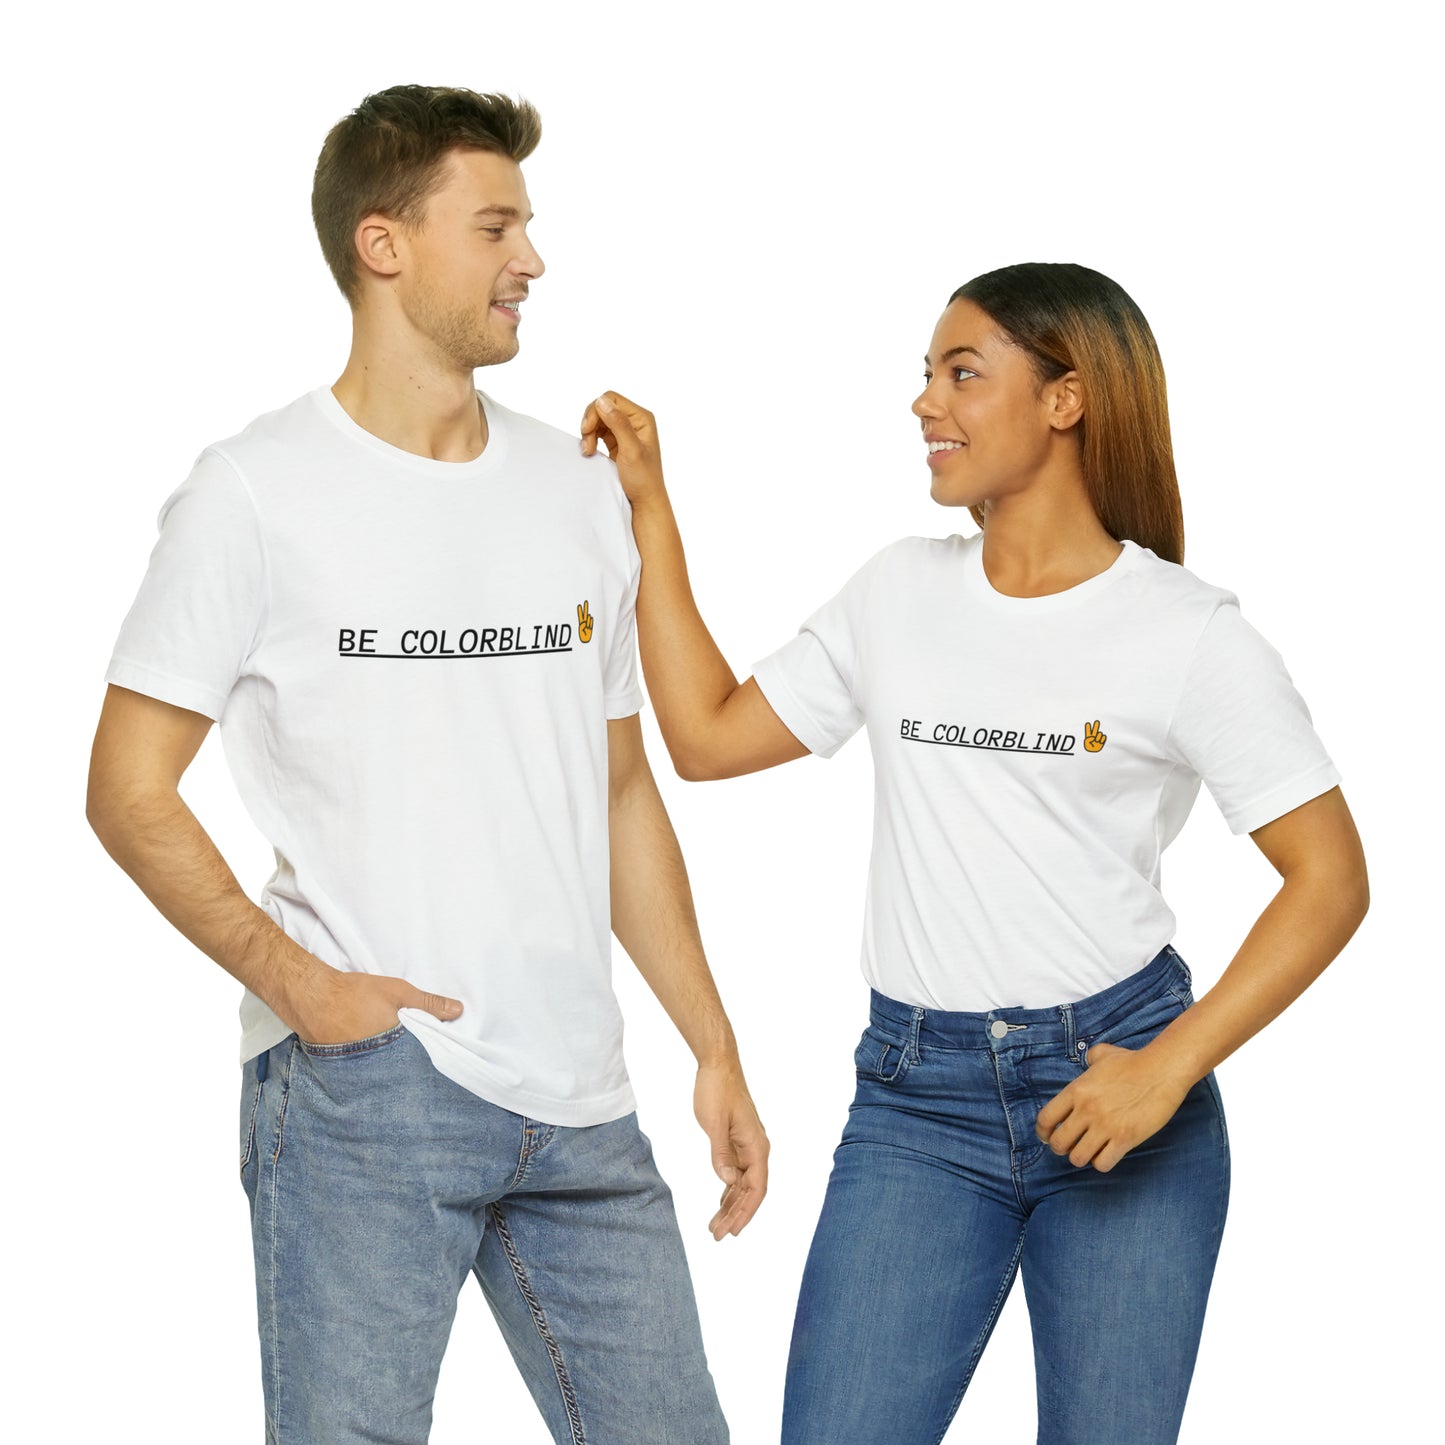 BE COLORBLIND Unisex Jersey Short Sleeve Tee